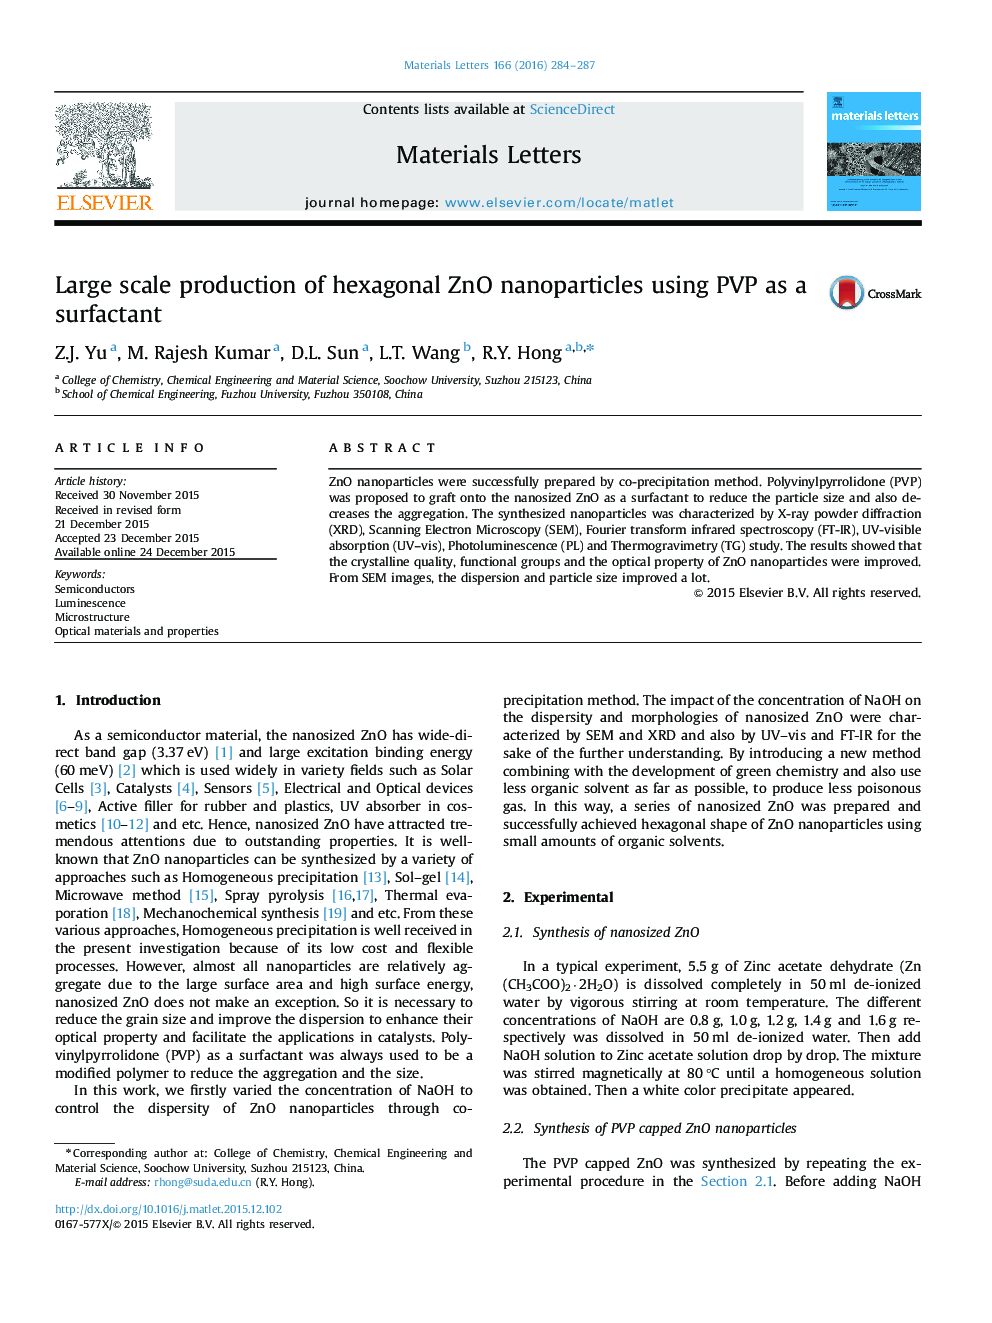 Large scale production of hexagonal ZnO nanoparticles using PVP as a surfactant